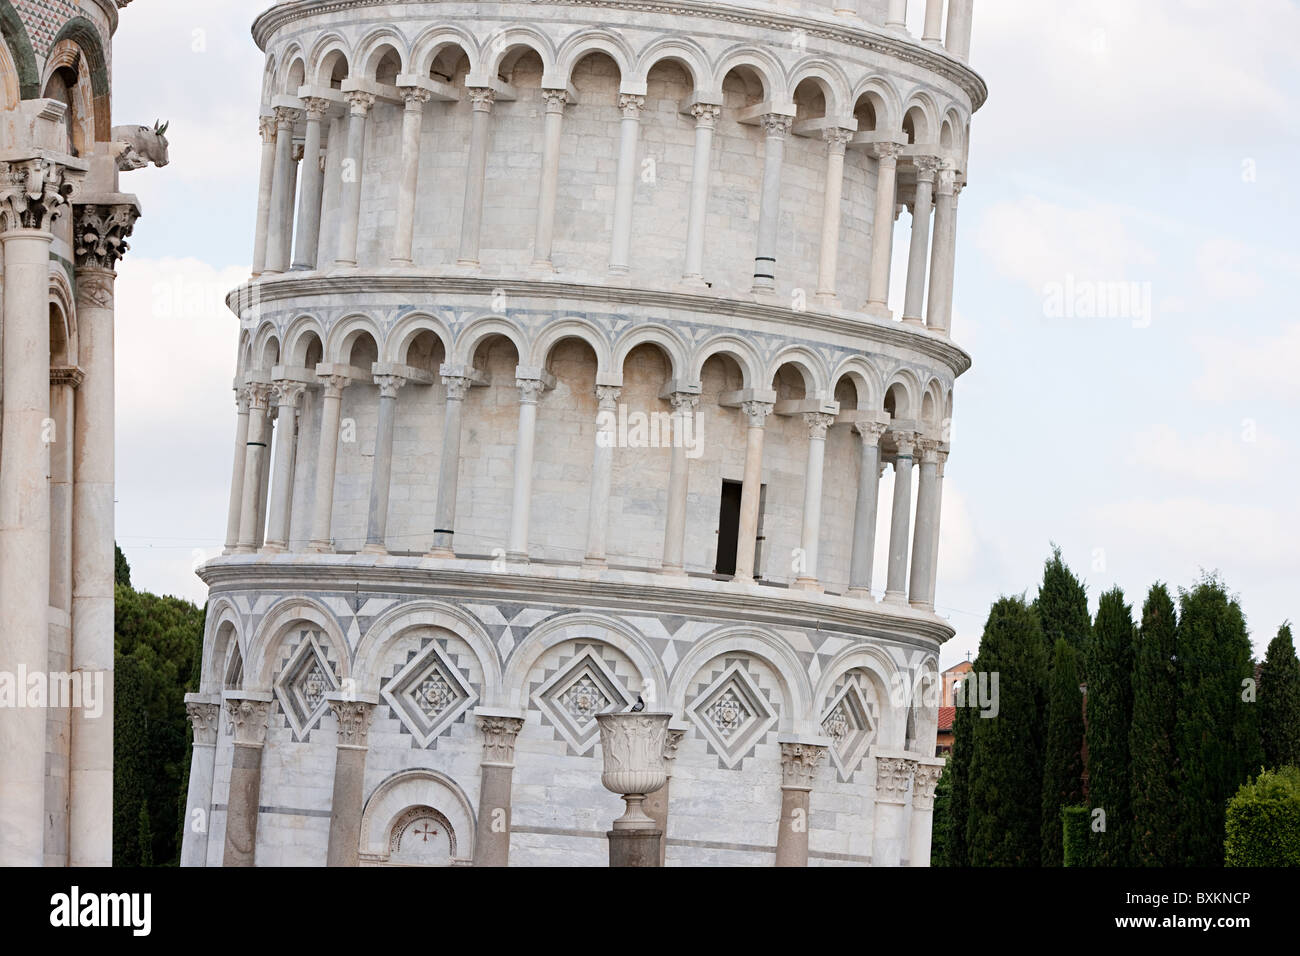 Leaning tower of Pisa, Italy Stock Photo